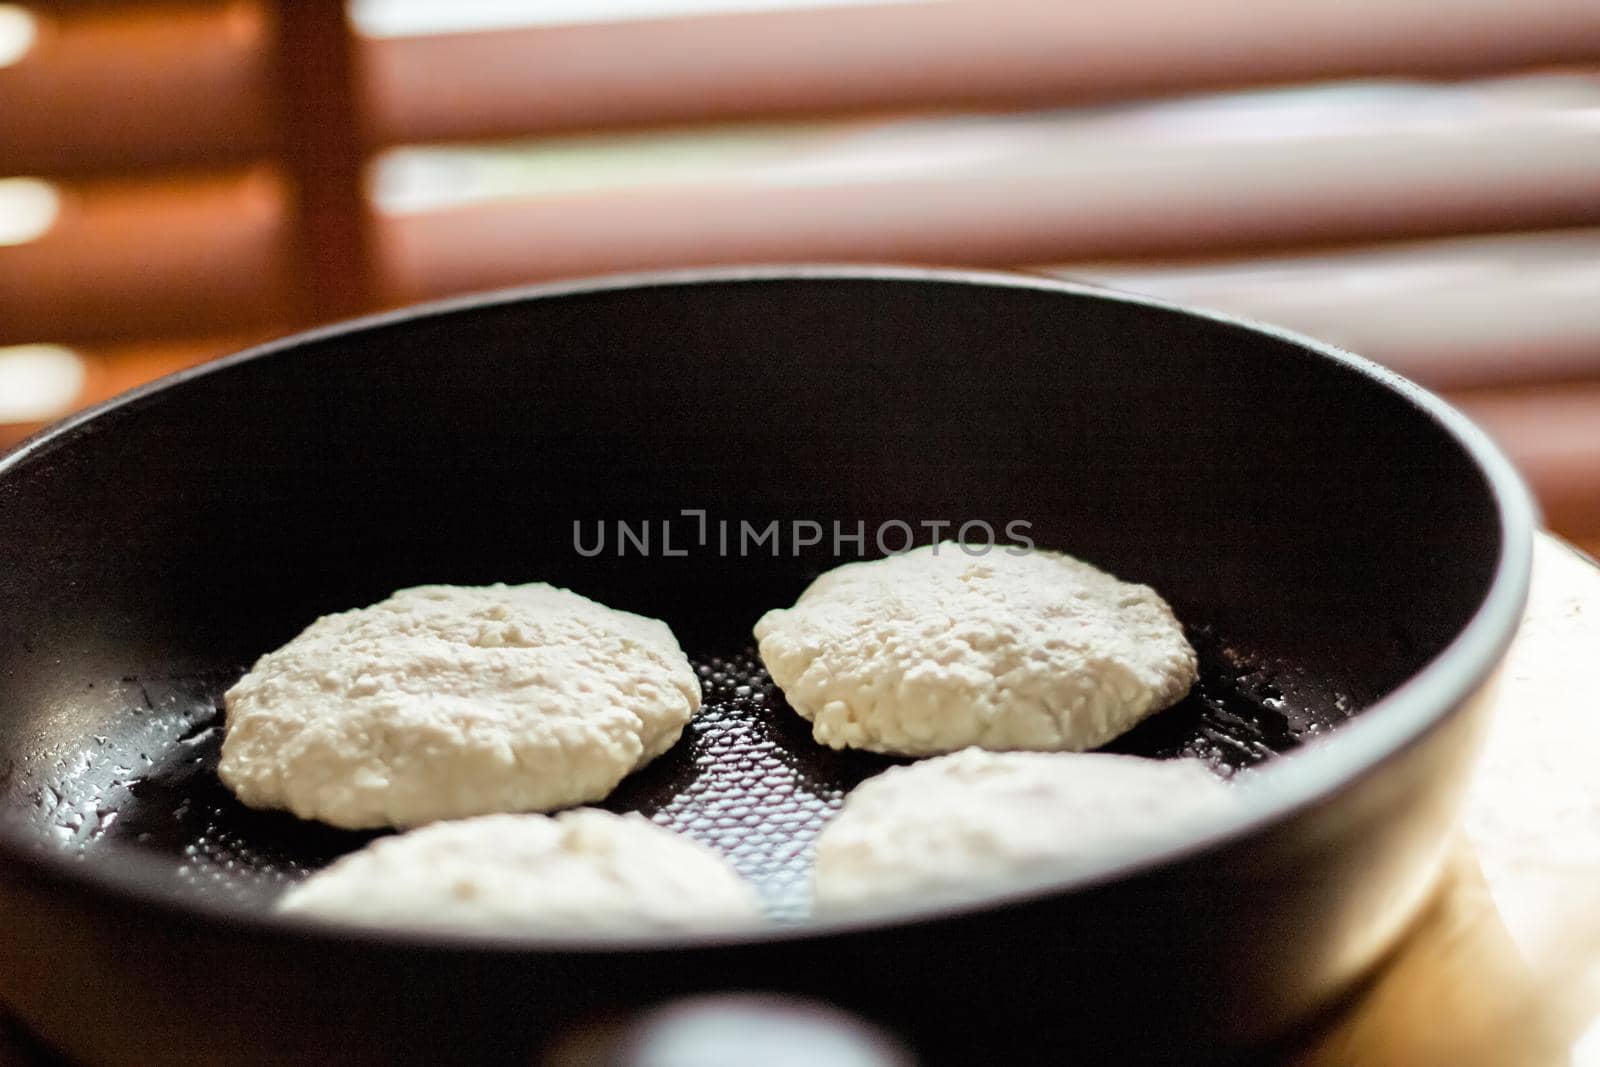 Pancakes on frying pan, rustic cookbook recipe - weekend cooking, food blog and homemade cuisine concept. Making your favorite pancakes